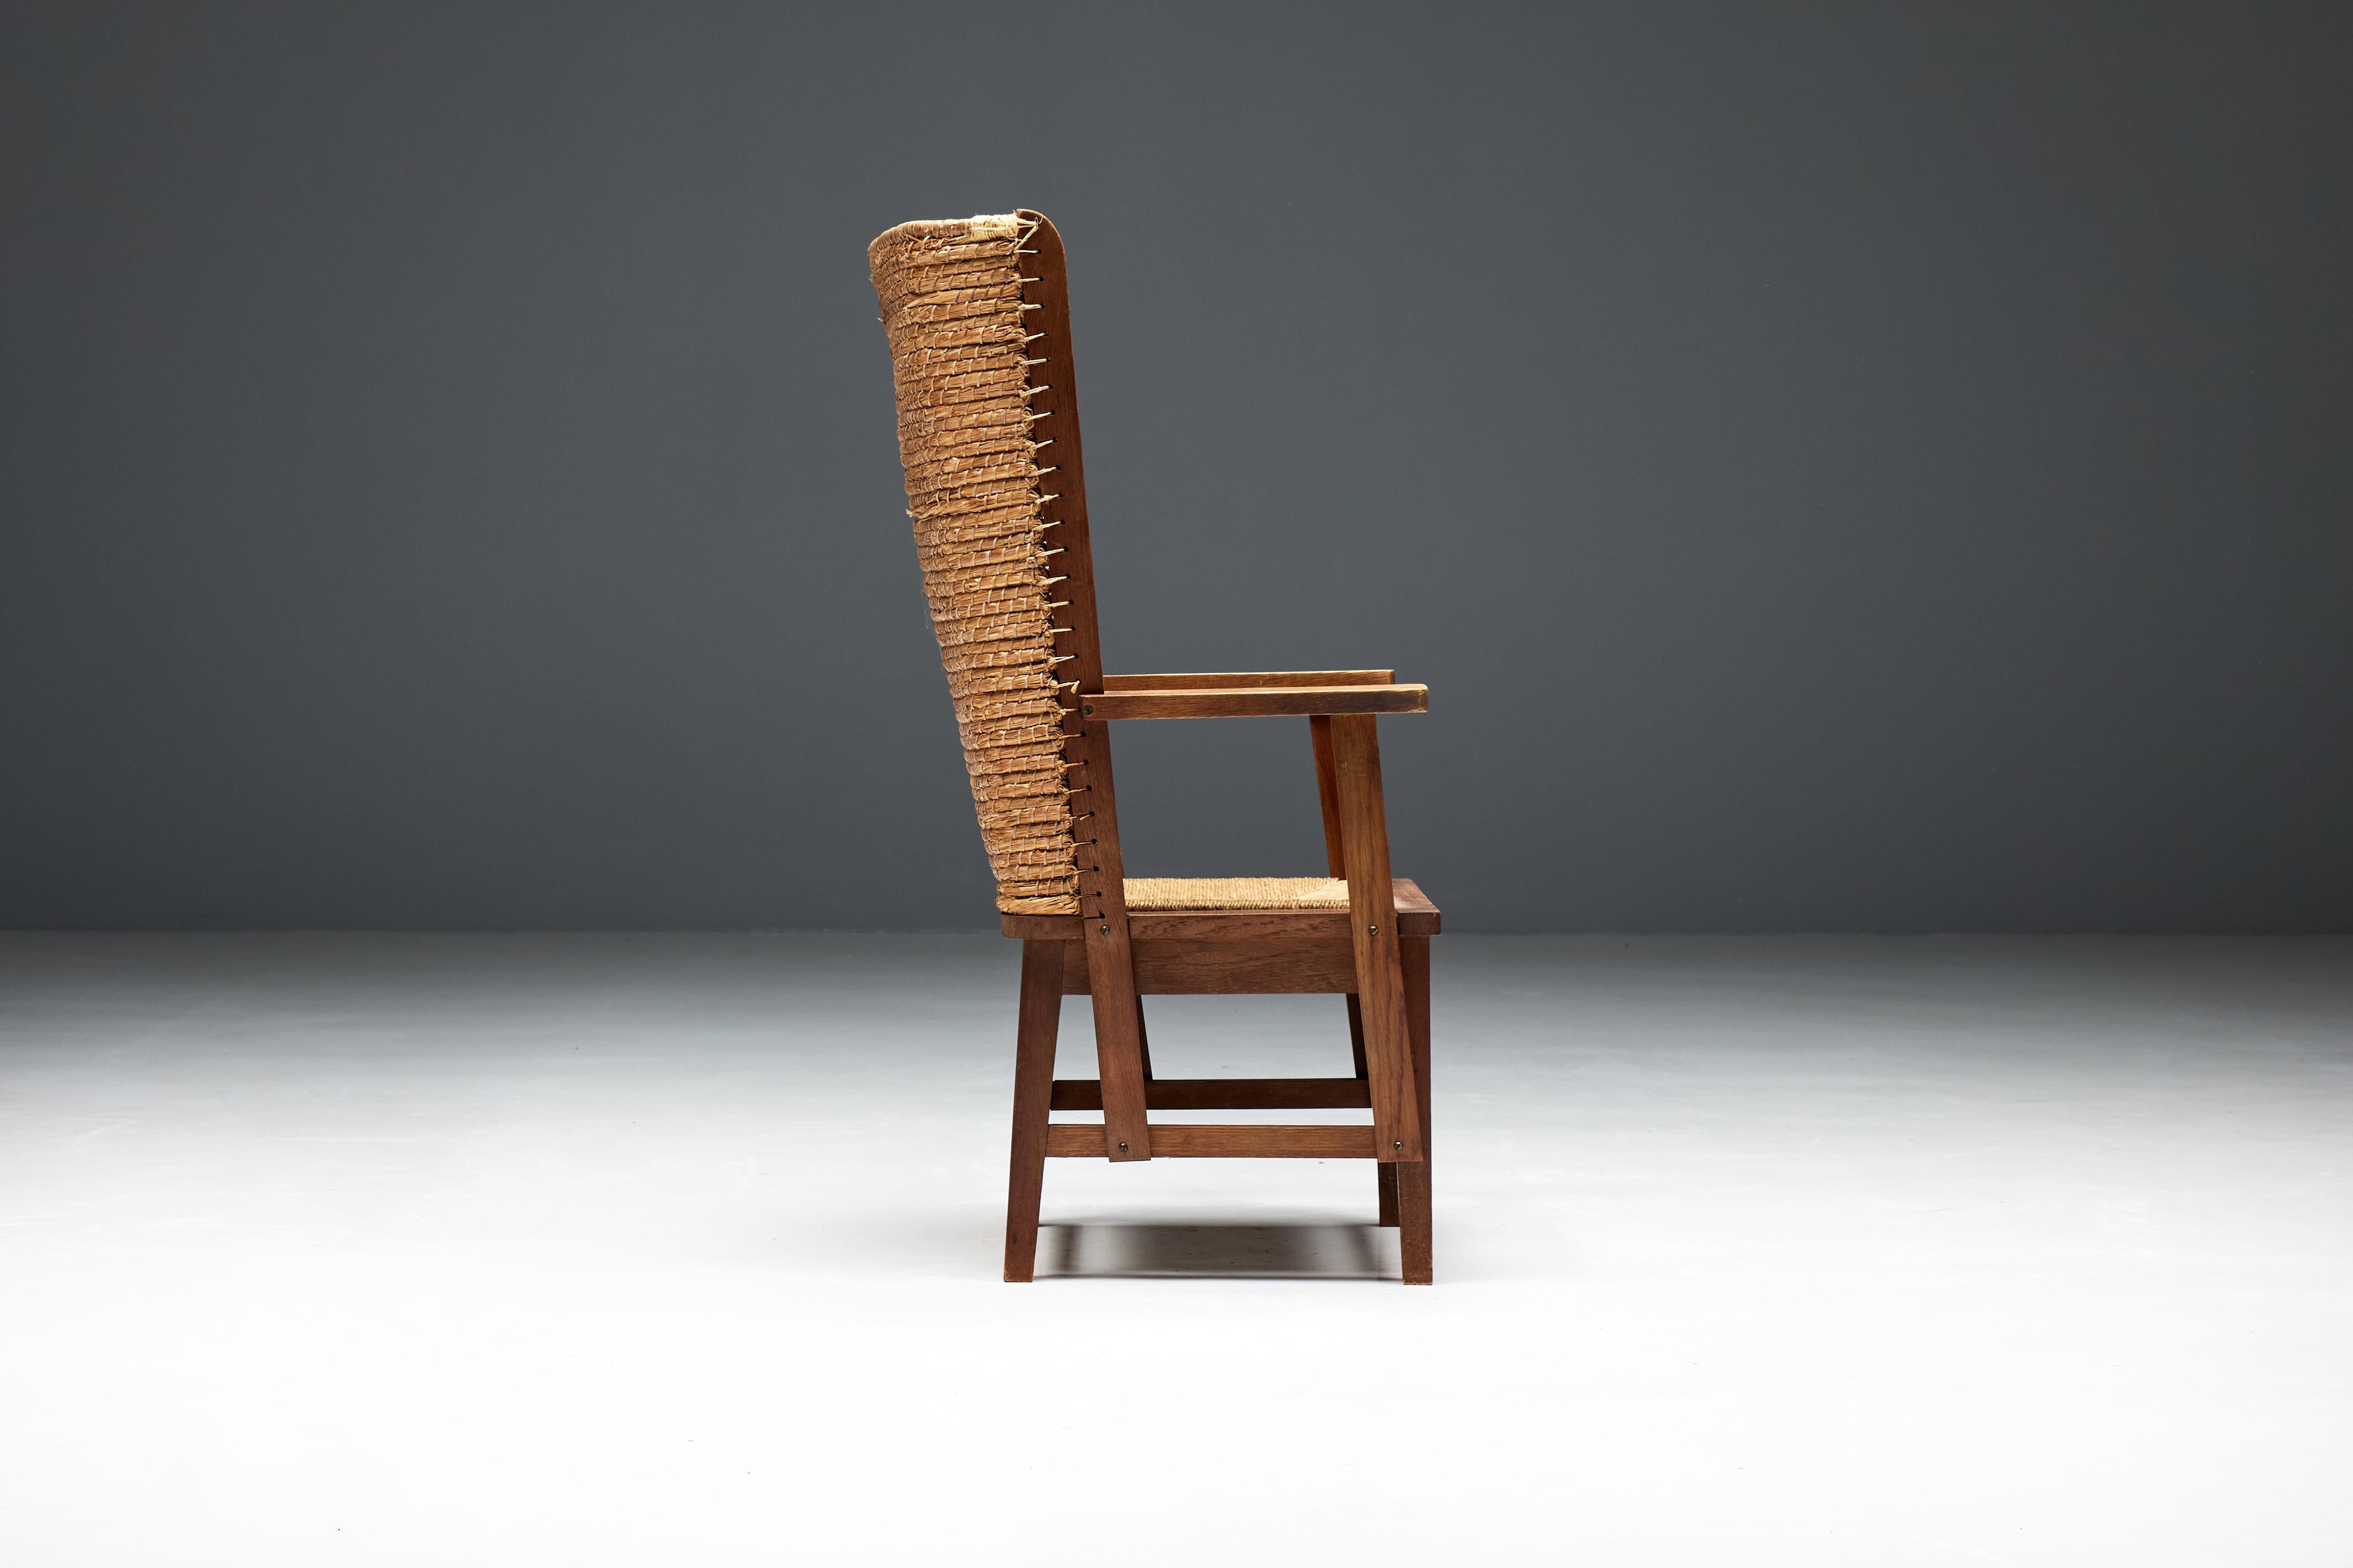 Scottish Orkney Chair in Wood and Oat Straw, Scotland, 19th Century For Sale